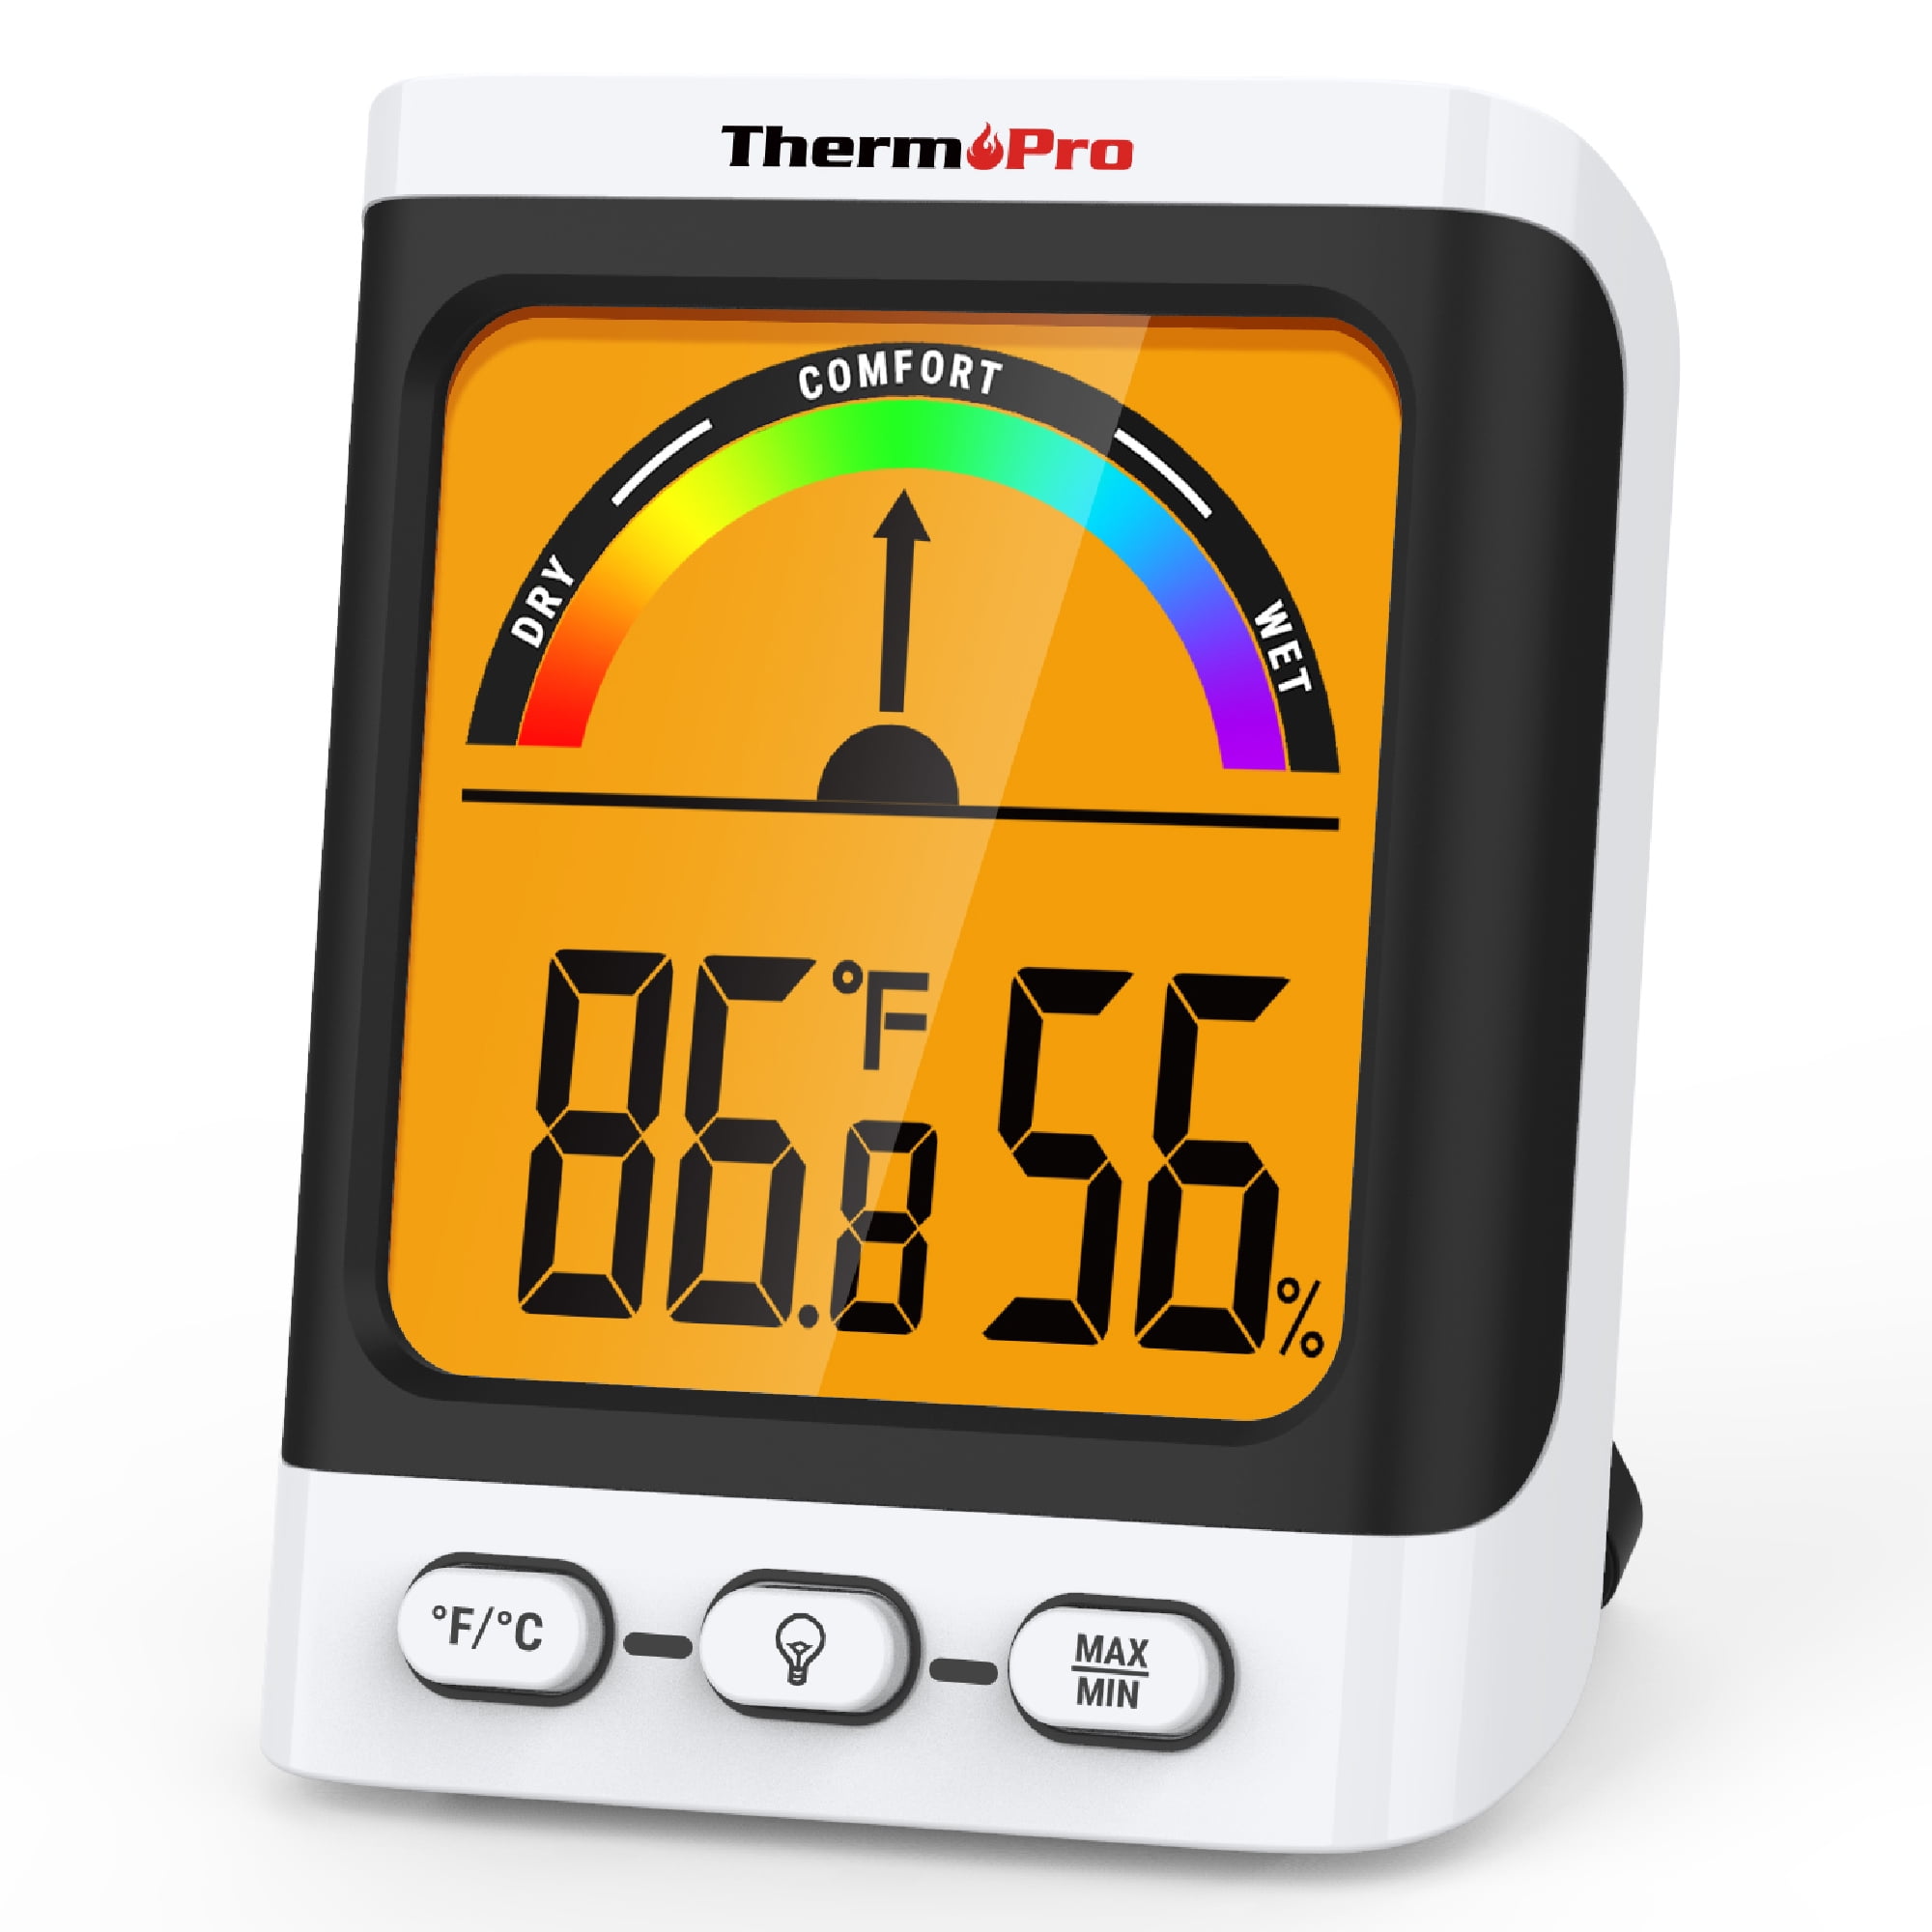 ThermoPro TP52 Digital Hygrometer Indoor Thermometer Temperature and Humidity  Gauge Monitor Indicator Room Thermometer with Backlight LCD Display Humidity  Meter 